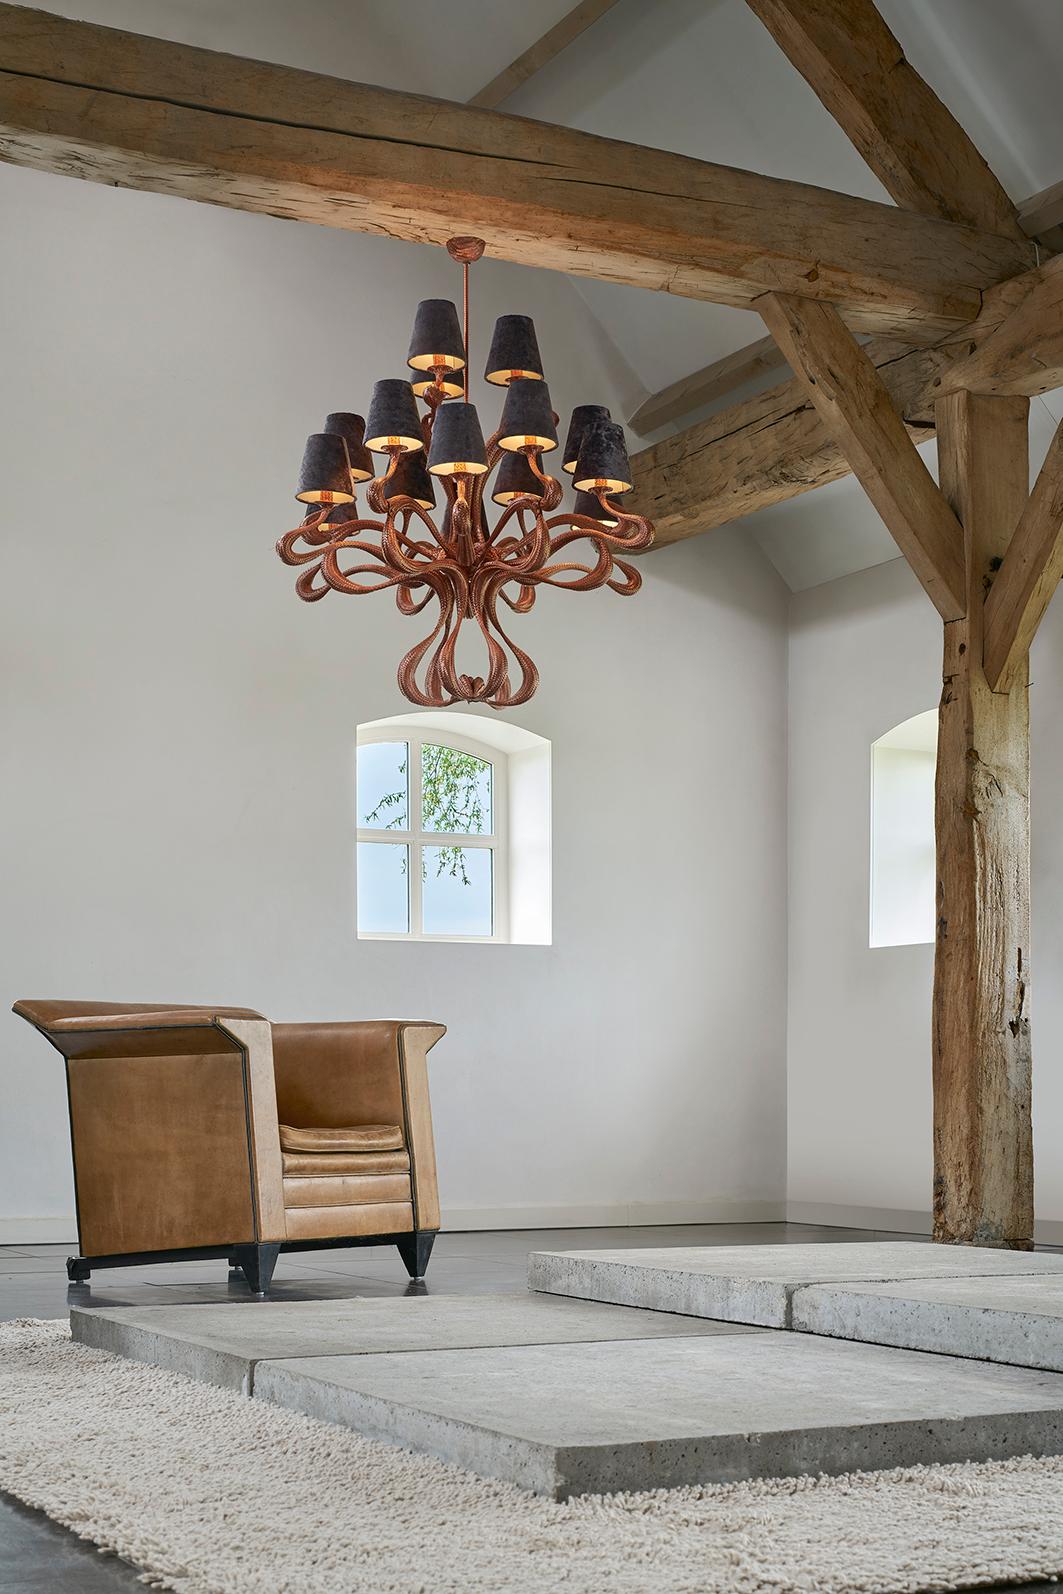 Being an homage to 17th century chandeliers, it serves as a lyrical reference to those graceful forms while placing itself squarely in the 21st century due to the material it’s made of. The high-pressure hose curling into 15-light configuration is